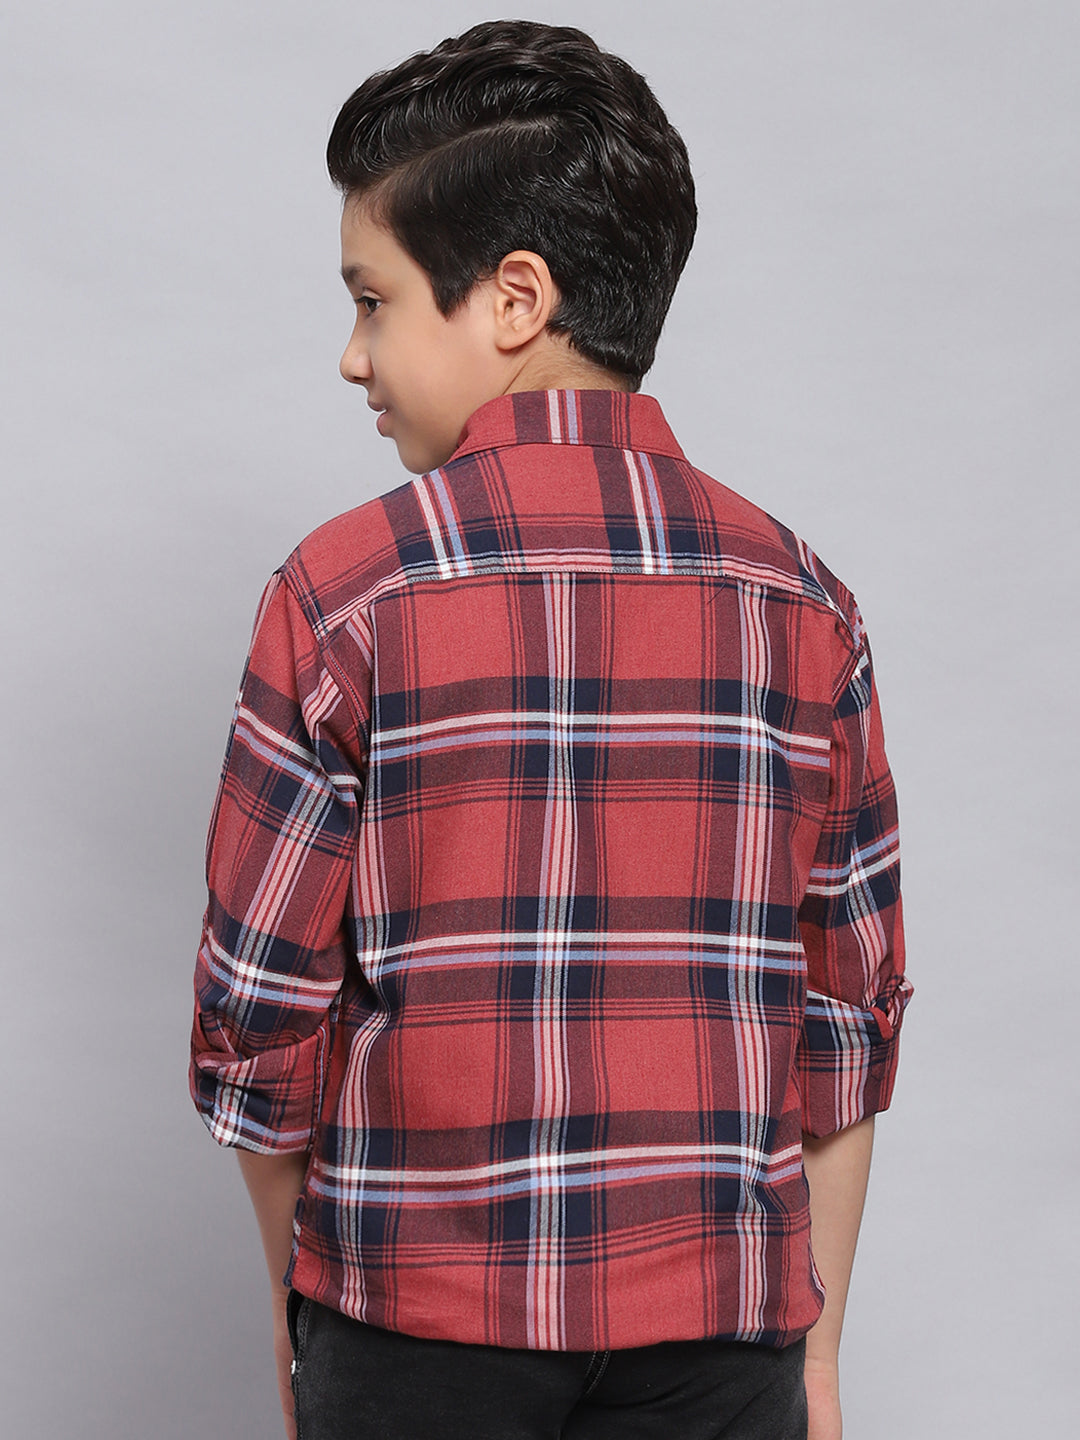 Boys Red Check Spread Collar Full Sleeve Shirts